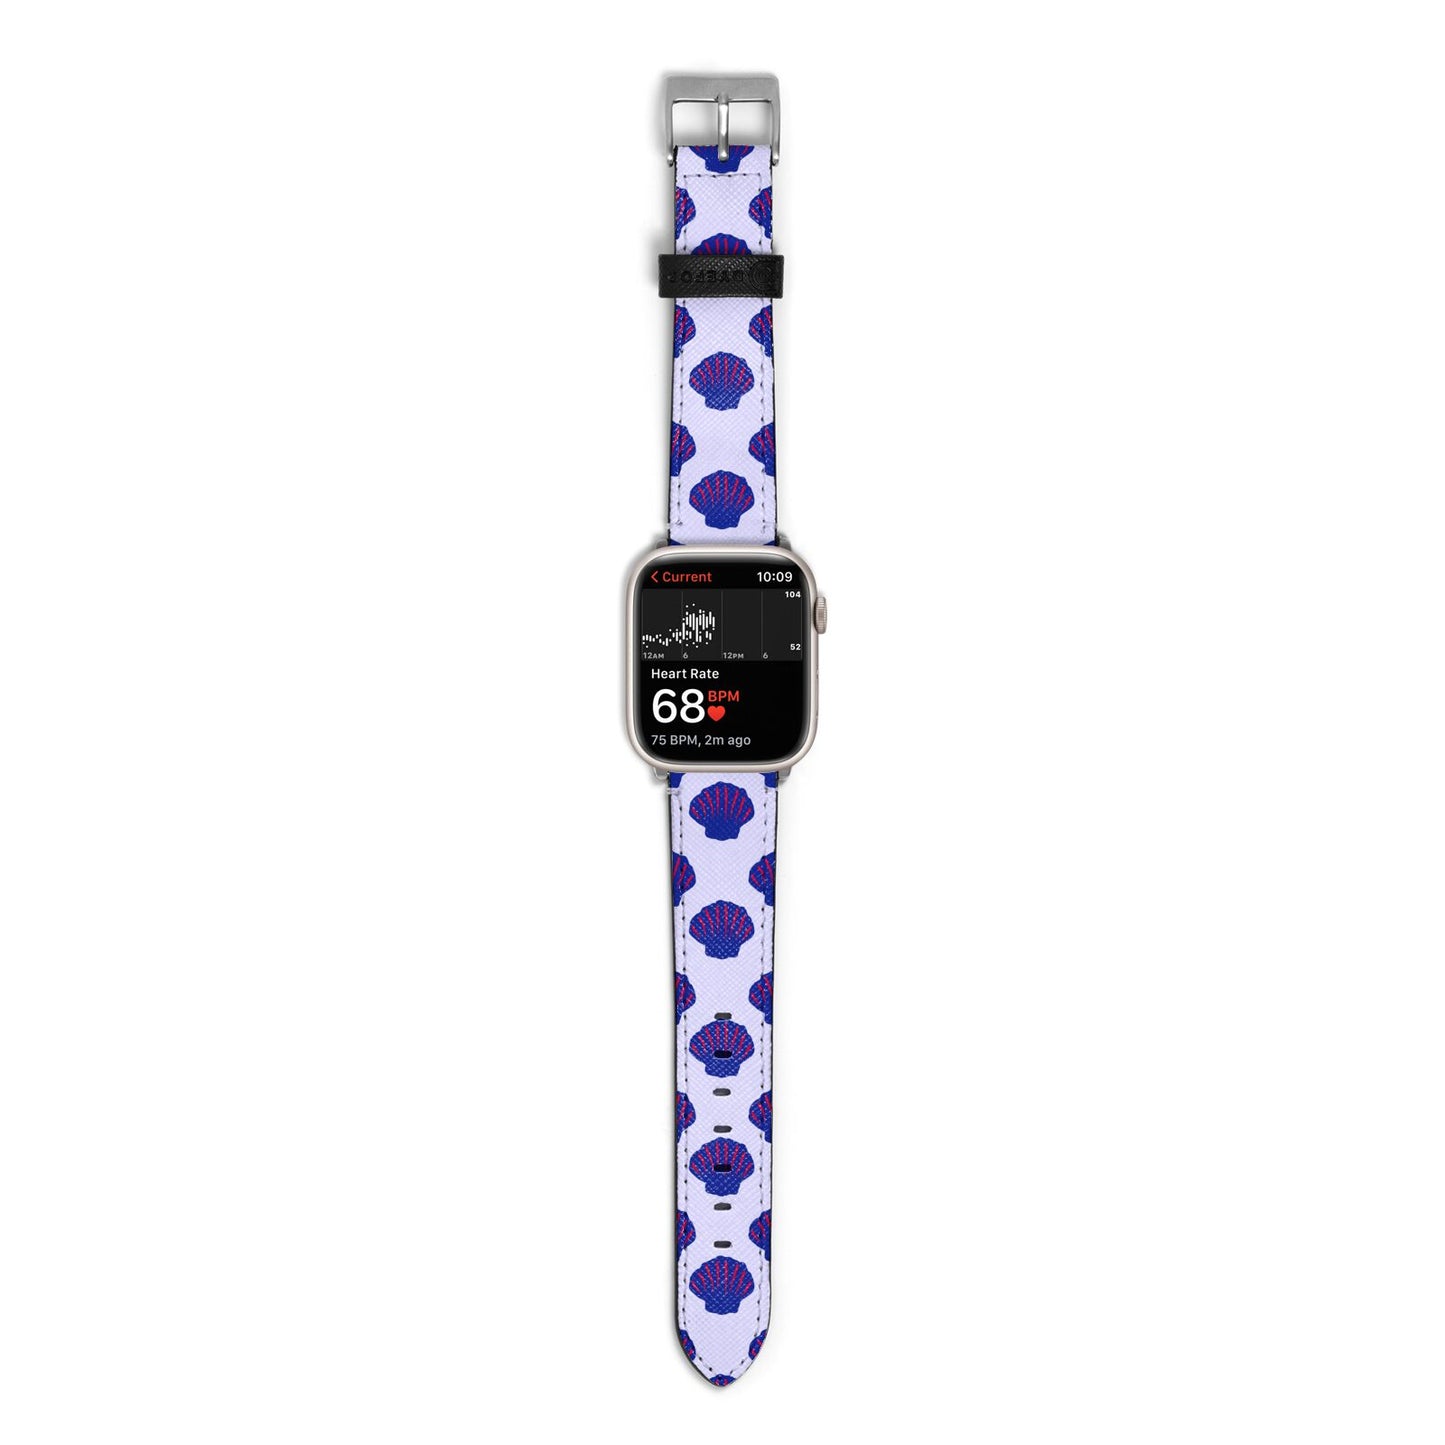 Shell Pattern Apple Watch Strap Size 38mm with Silver Hardware